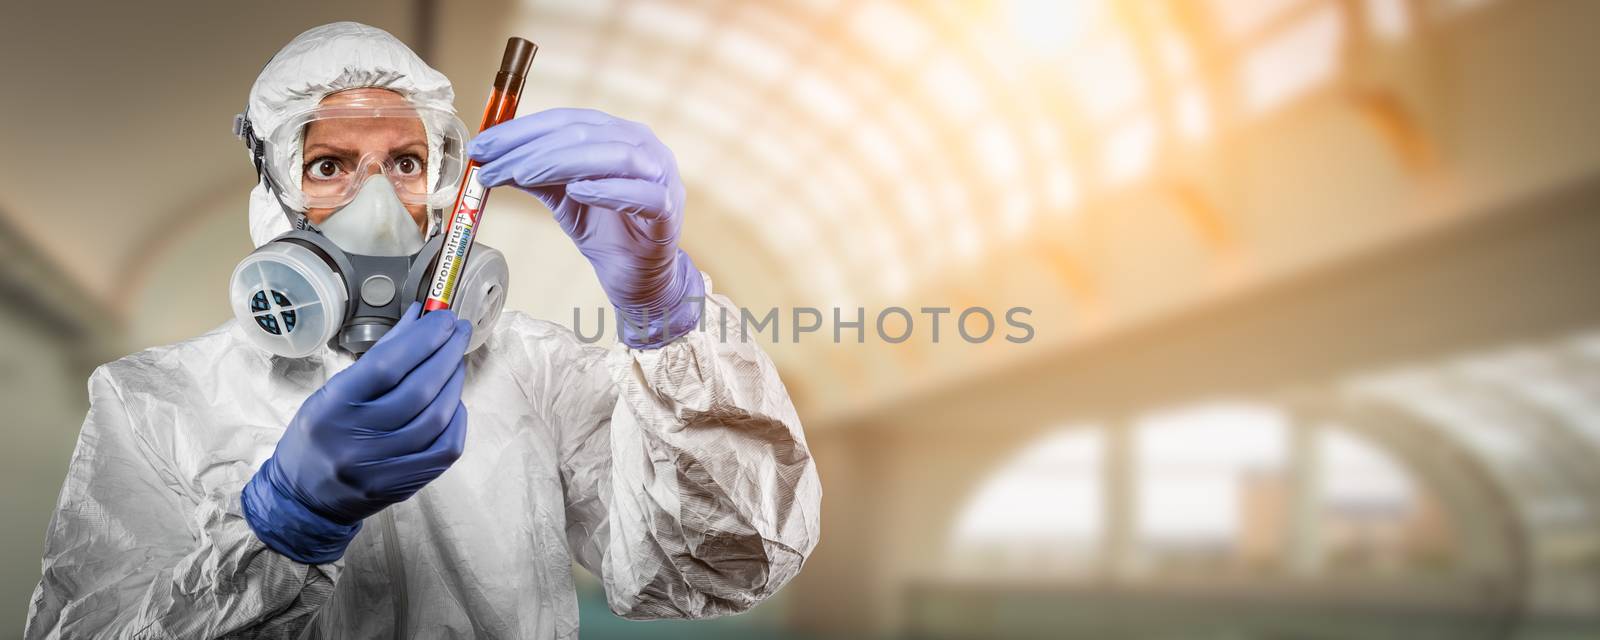 Female Doctor or Nurse In Hazmat Gear Holding Positive Coronavir by Feverpitched